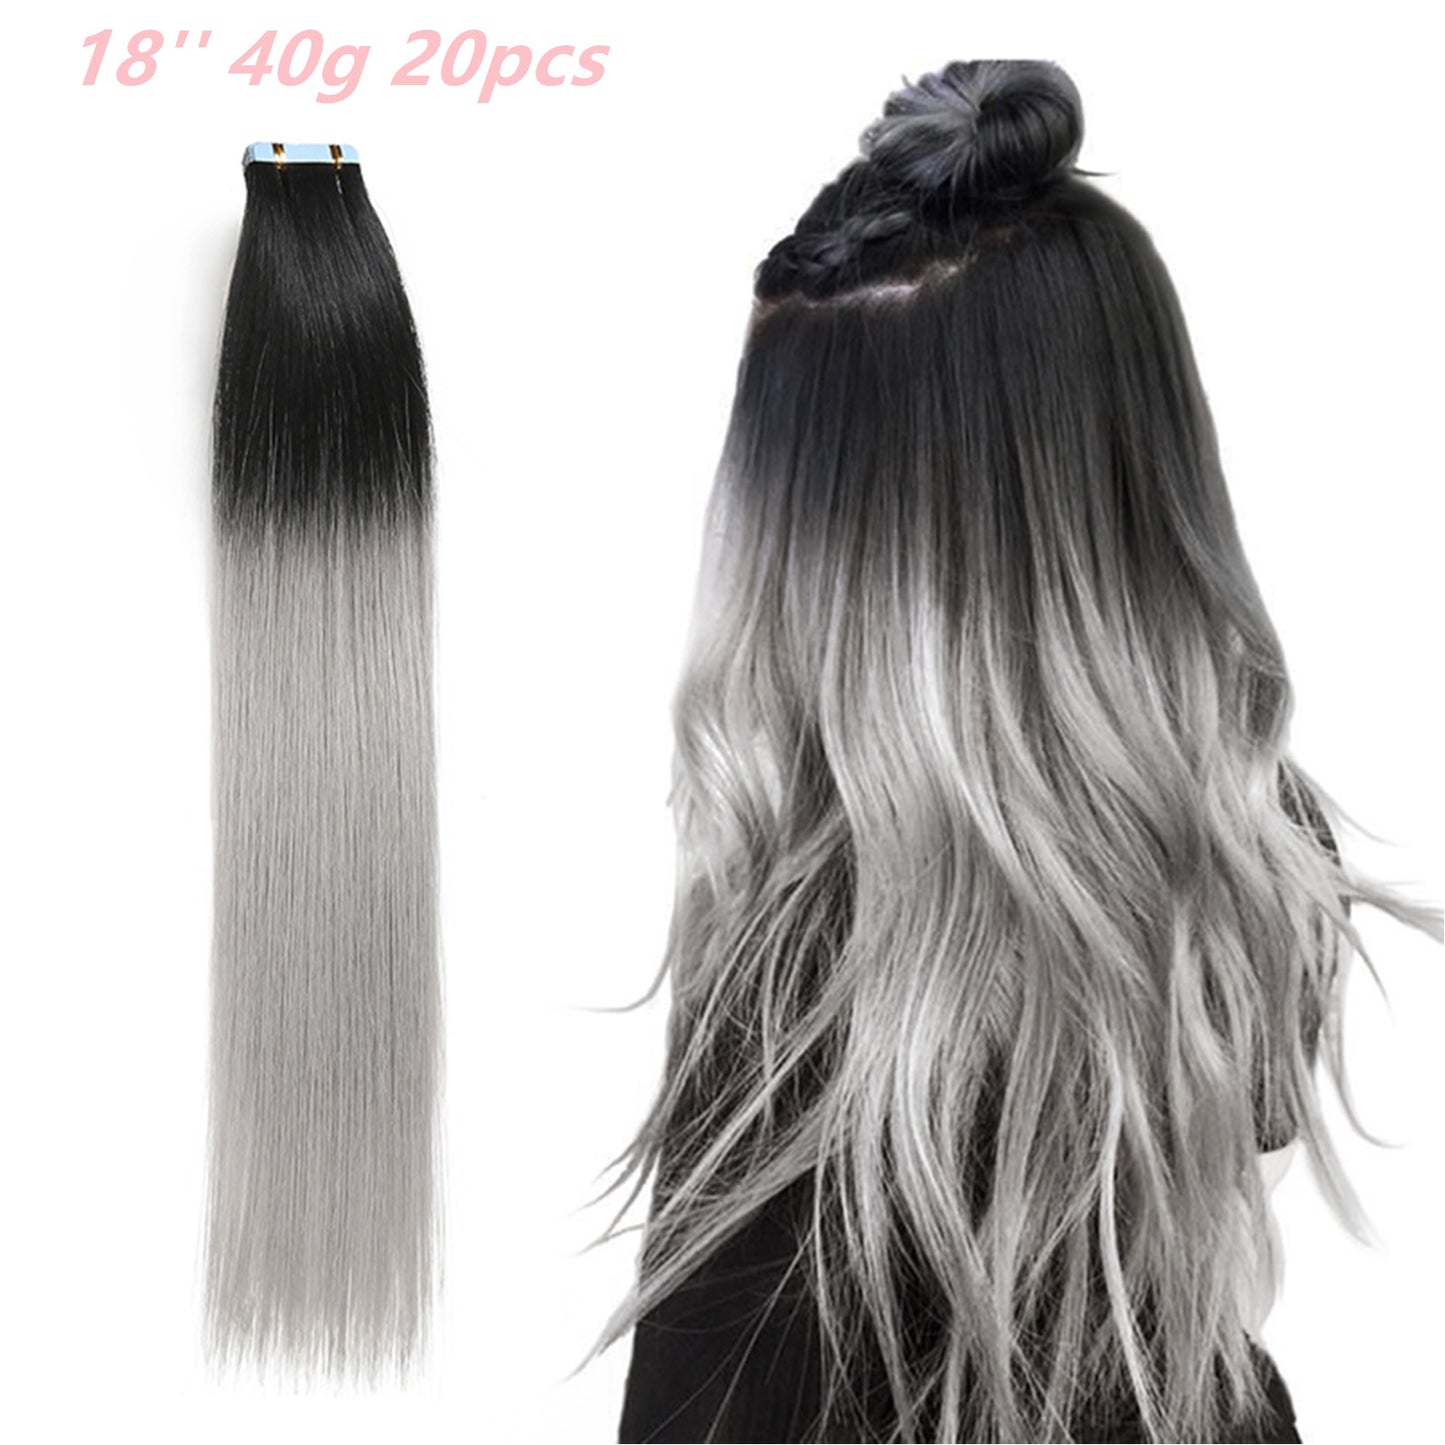 Ombre Tape in Hair Extensions, Black to Silver, Remy Human Hair, 20 Pieces per Pack